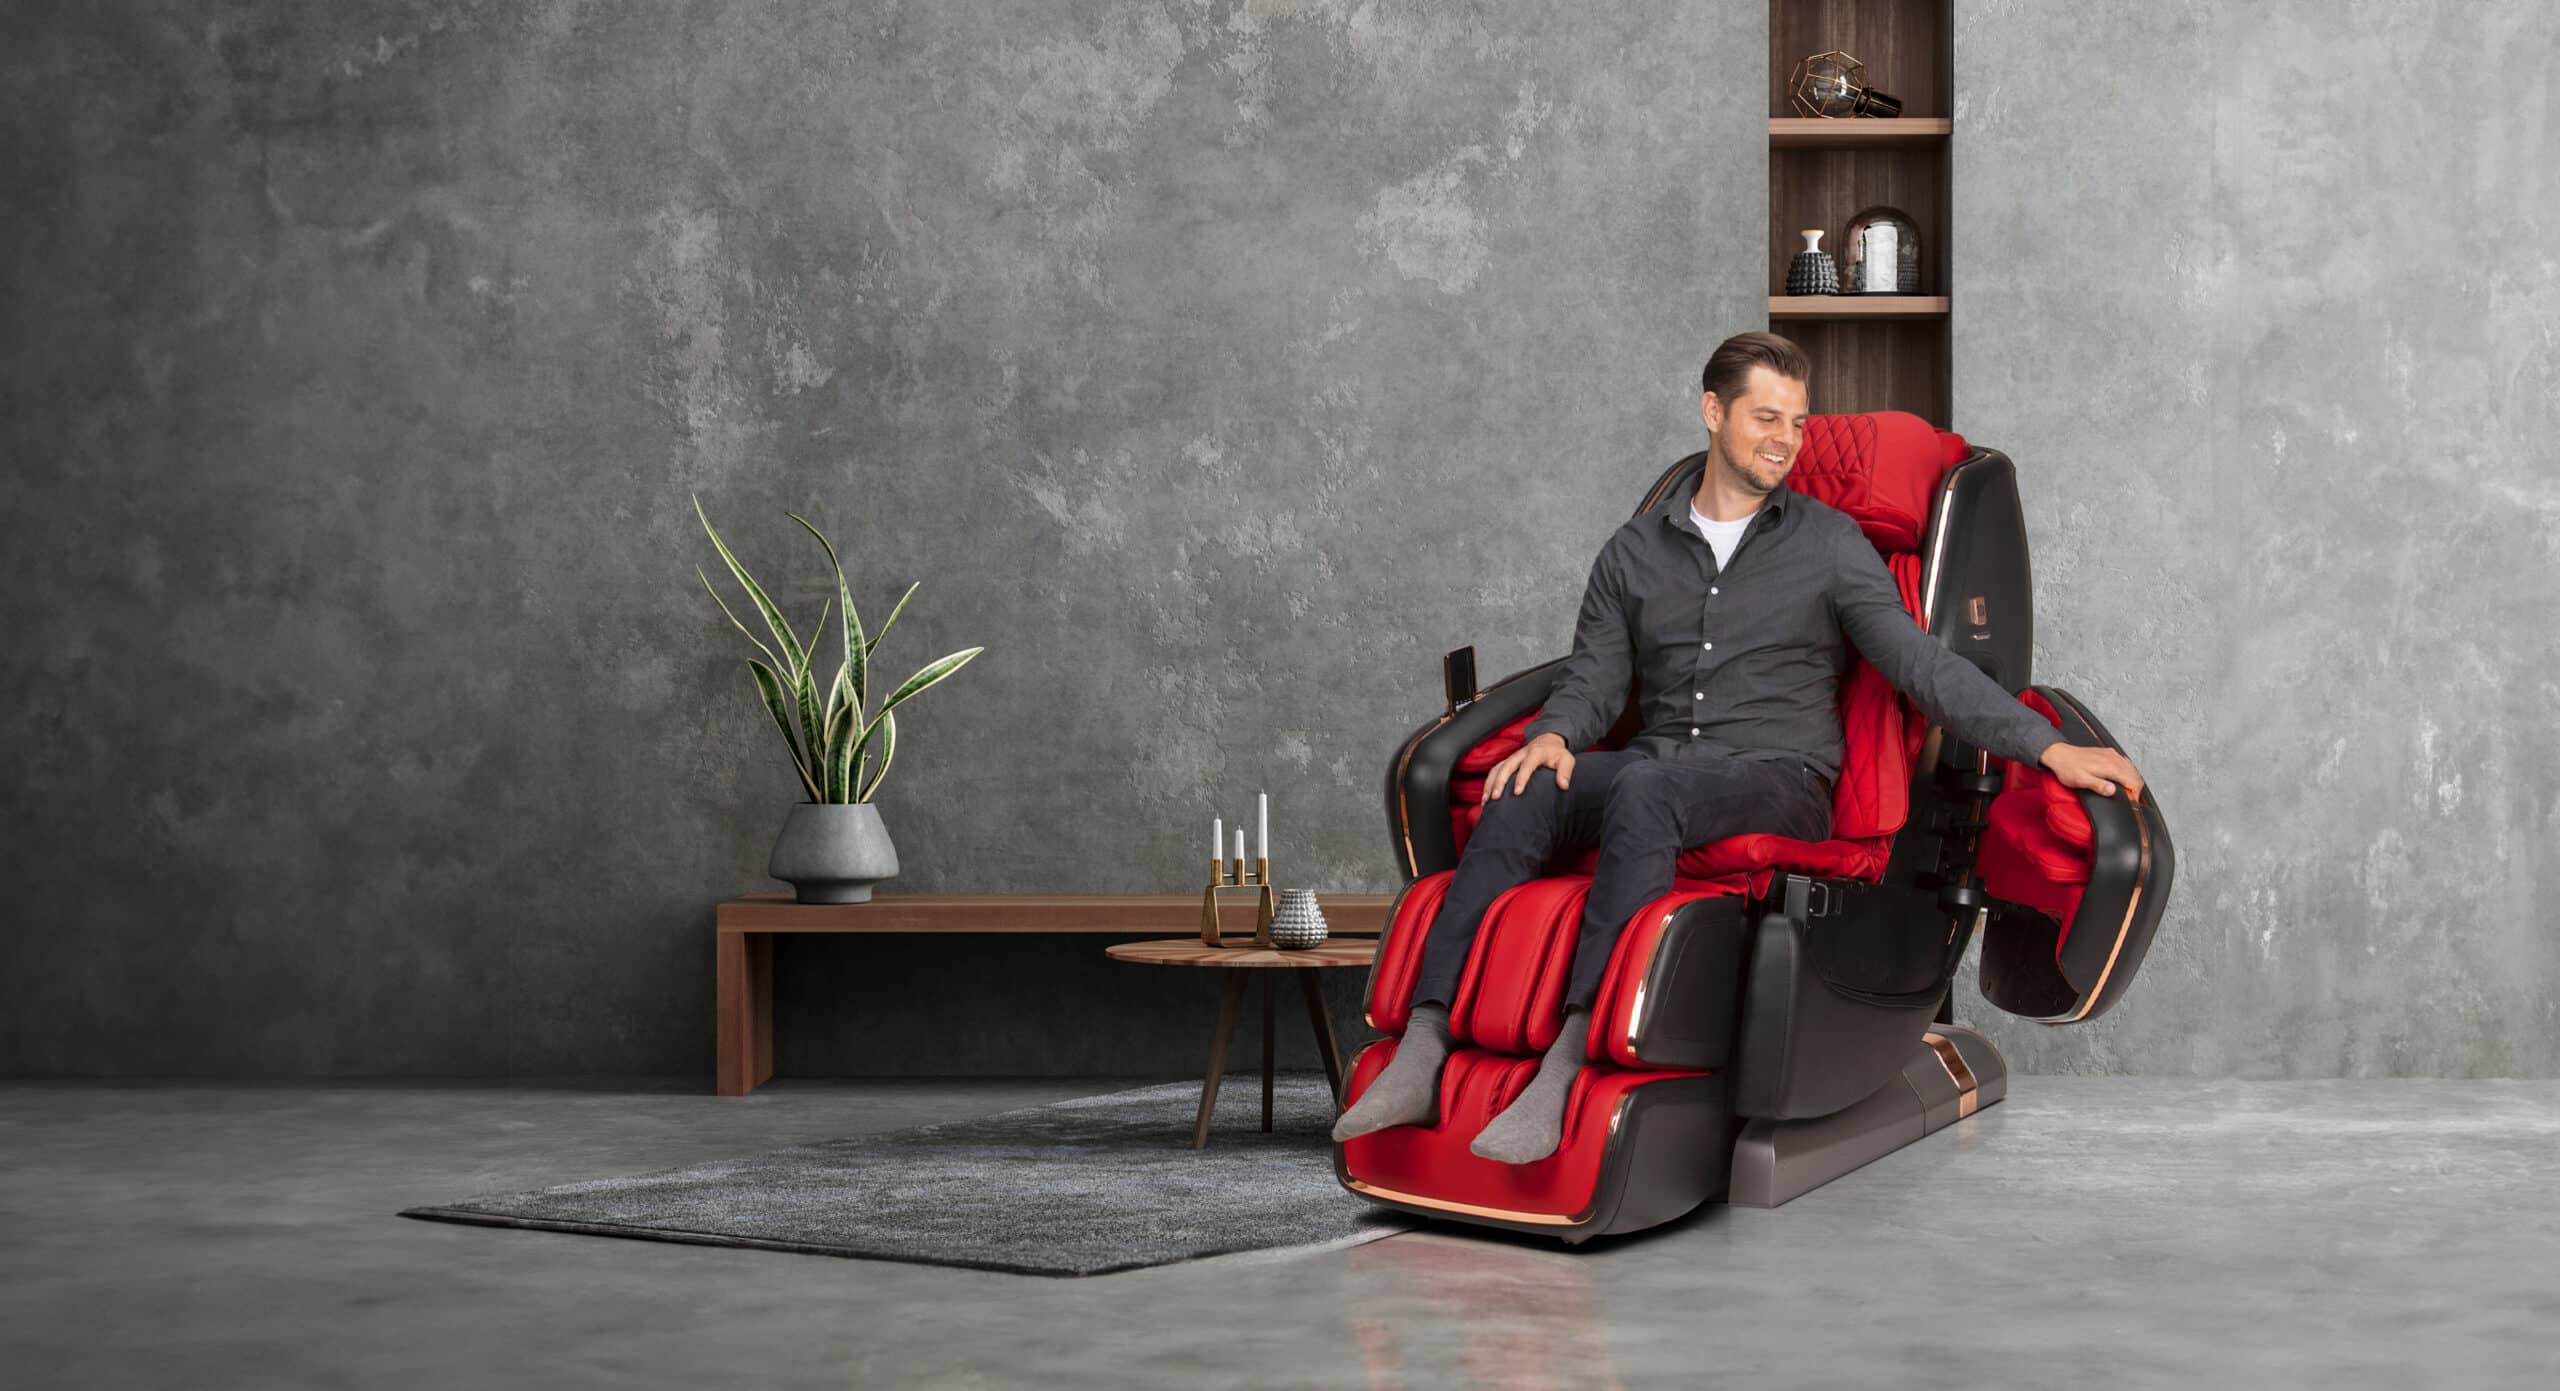 Explore the amazing features of the OHCO M8 luxury massage chair features